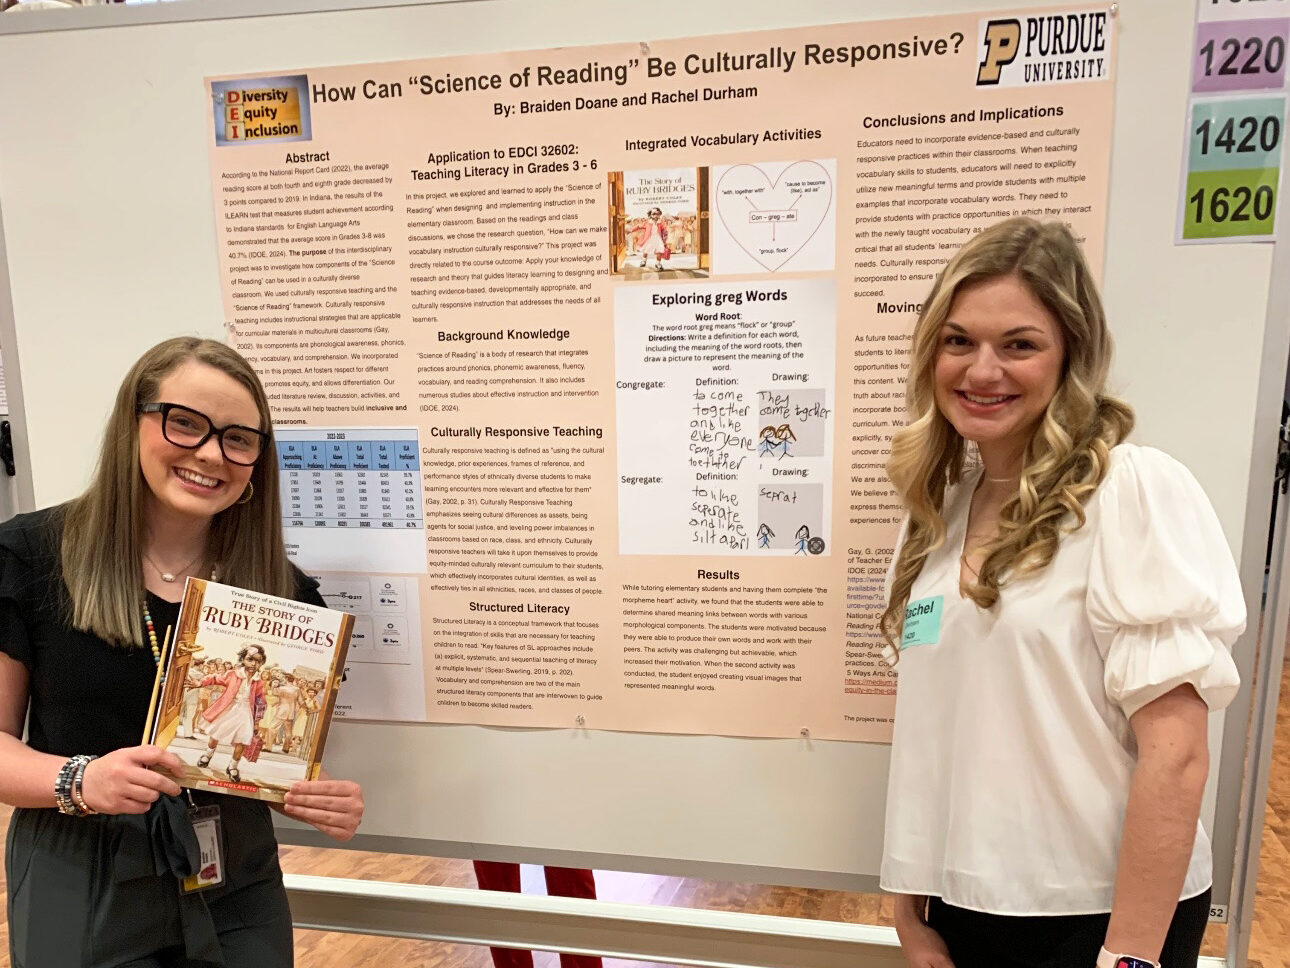 Braiden Doane and Rachel Durham standing in front of their research poster, titled "How Can Science of Reading Be Culturally Responsive?"